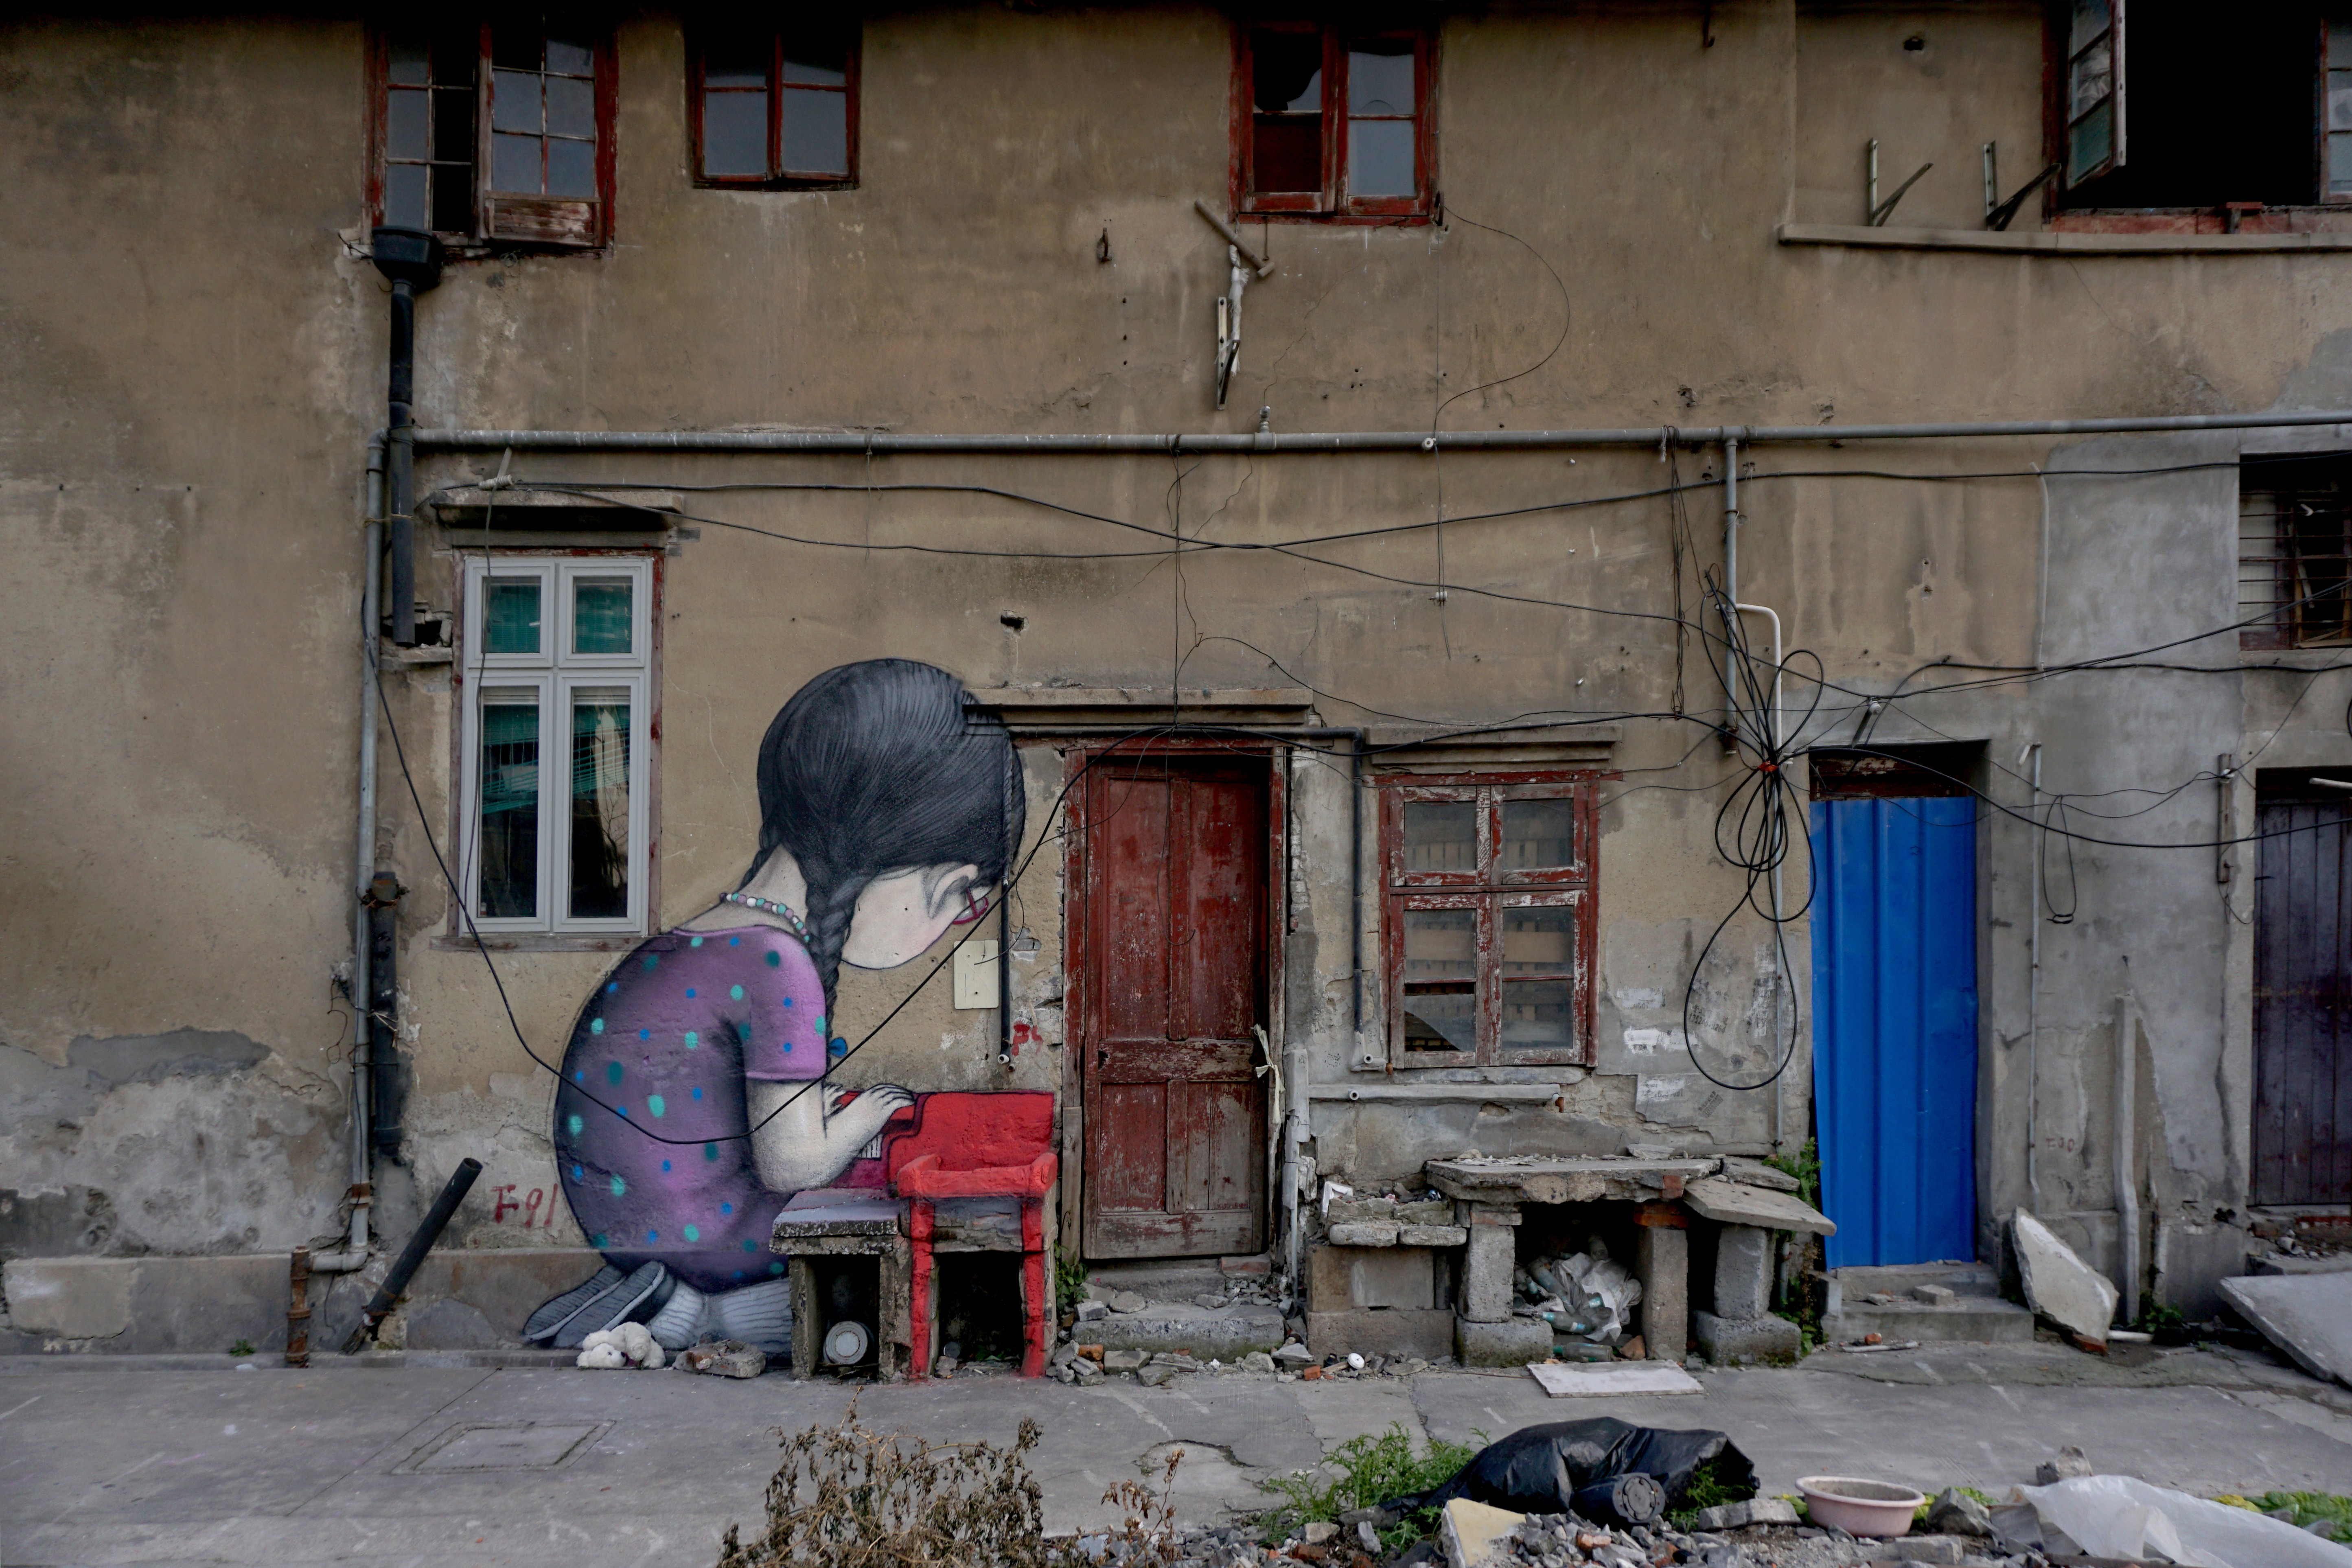 The innocent figures of Julien Malland, also known as Seth, are a world away from typical graffiti